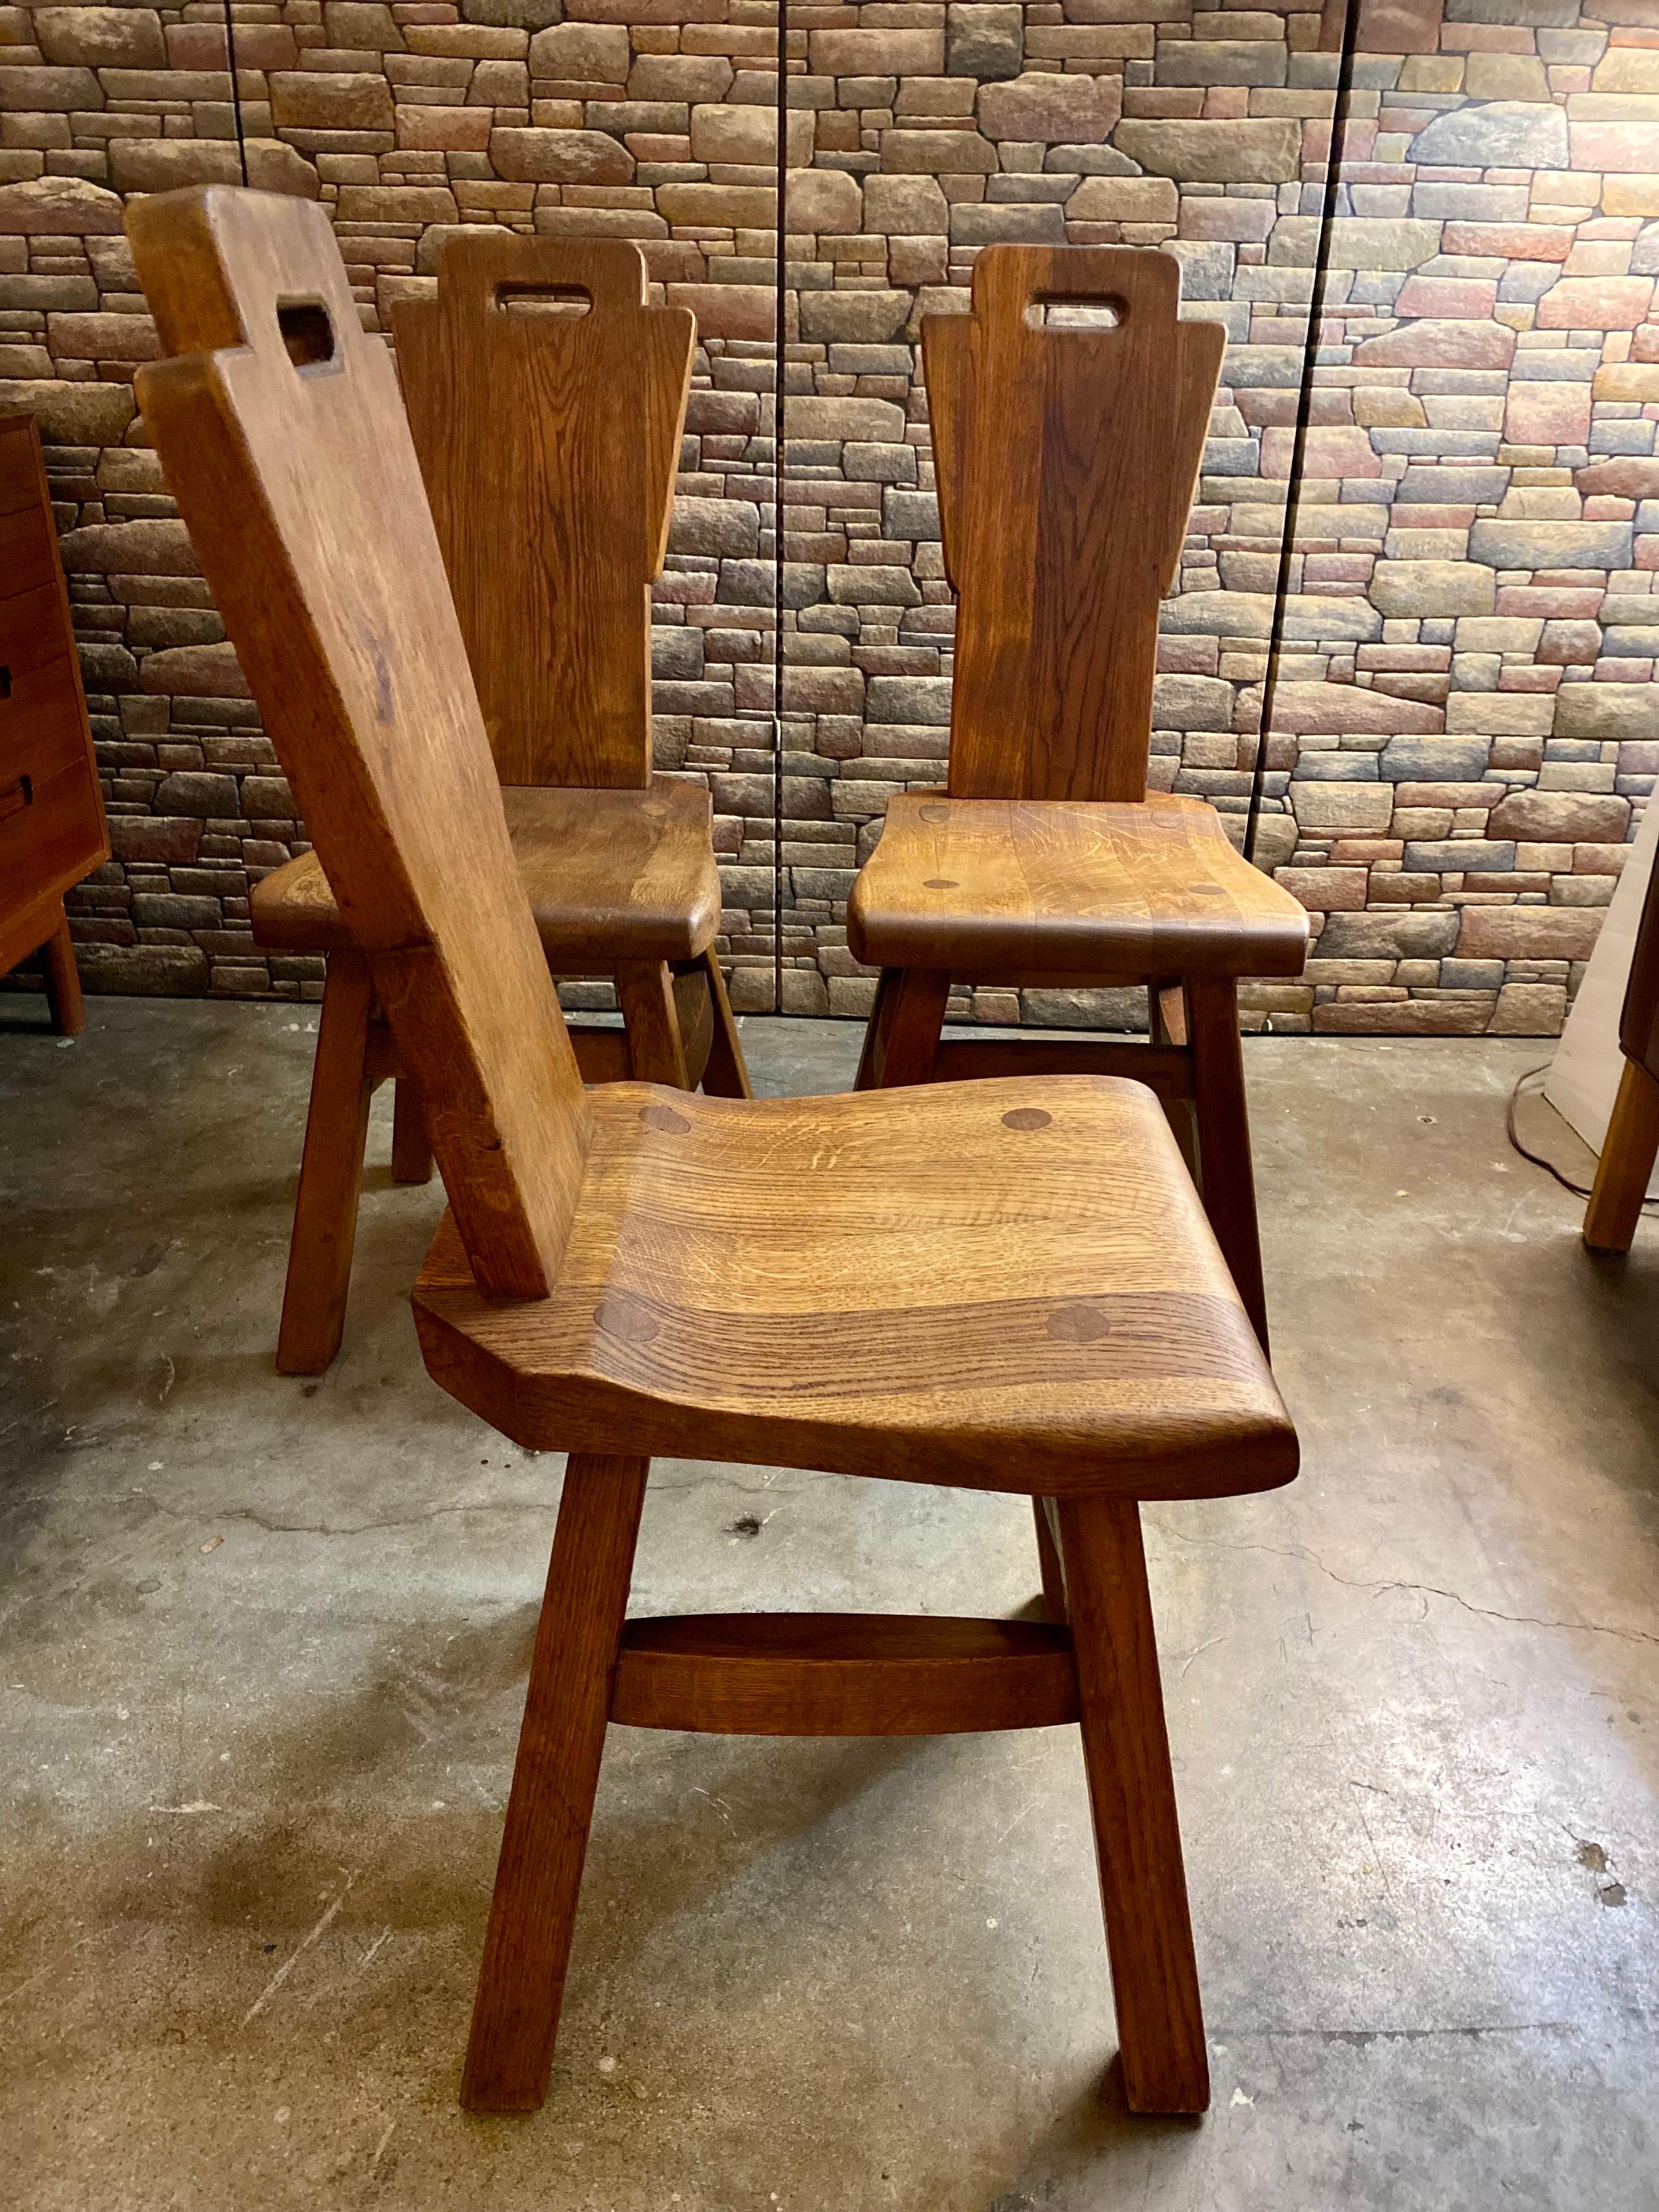 Set of 4 Brutalist Oak Dining Chairs, Netherlands, Circa 1970s For Sale 1